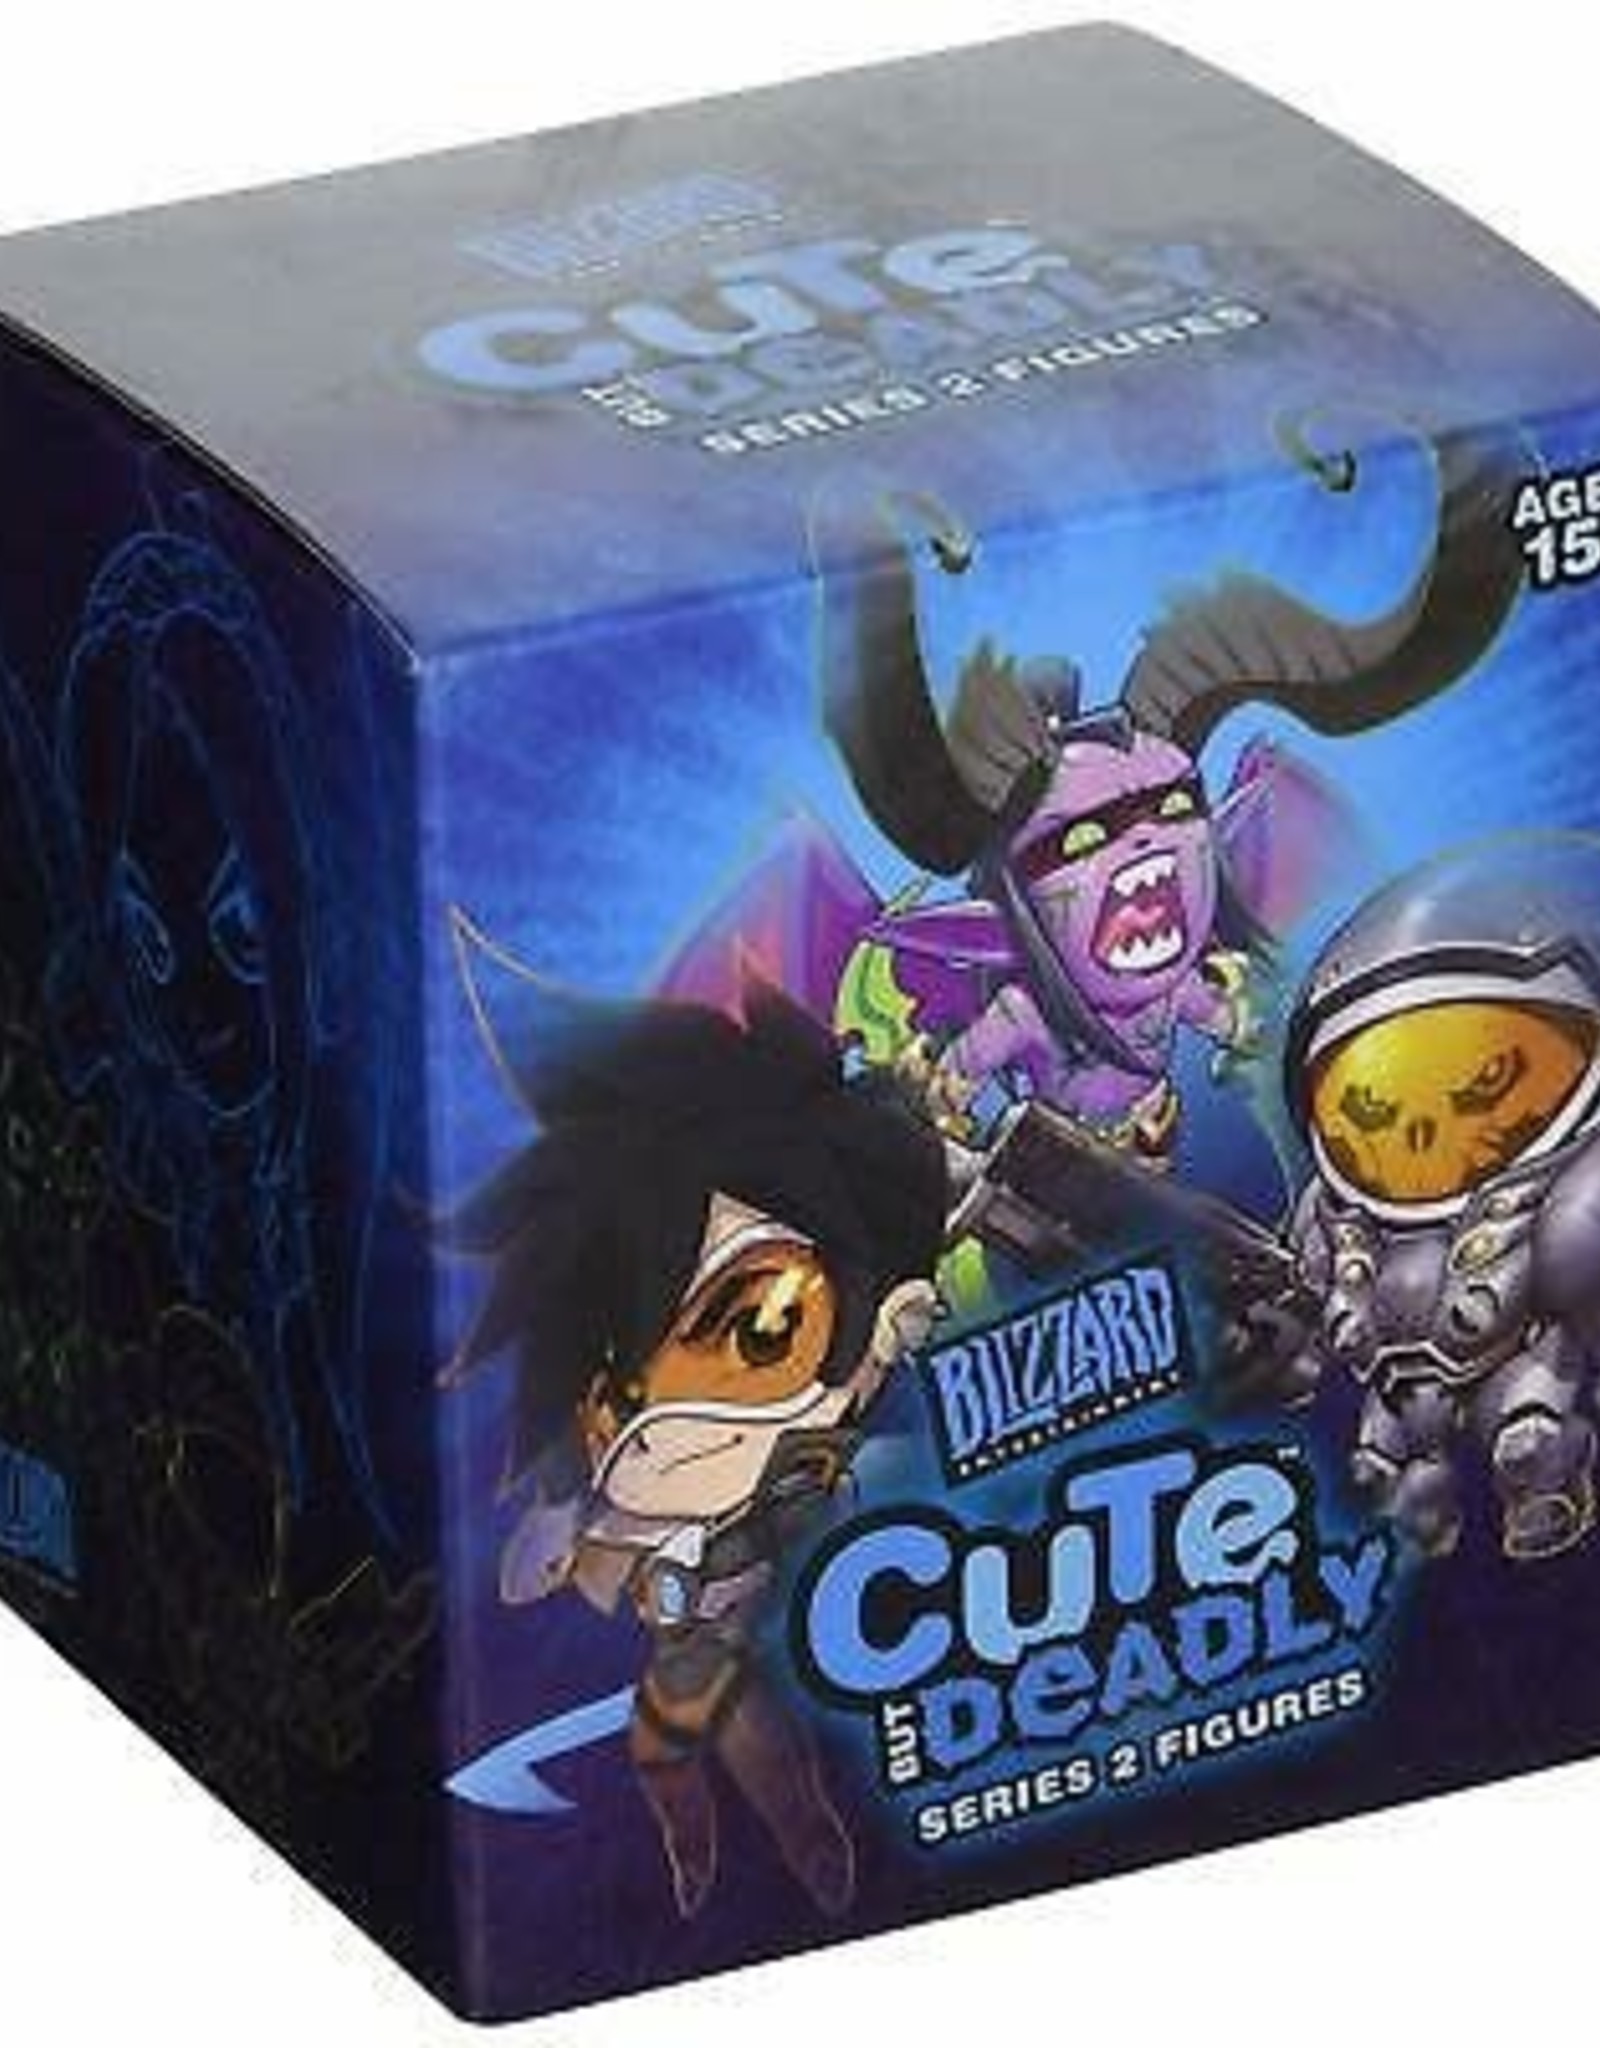 Blizzard Cute but Deadly Blind Box Figures Series 2